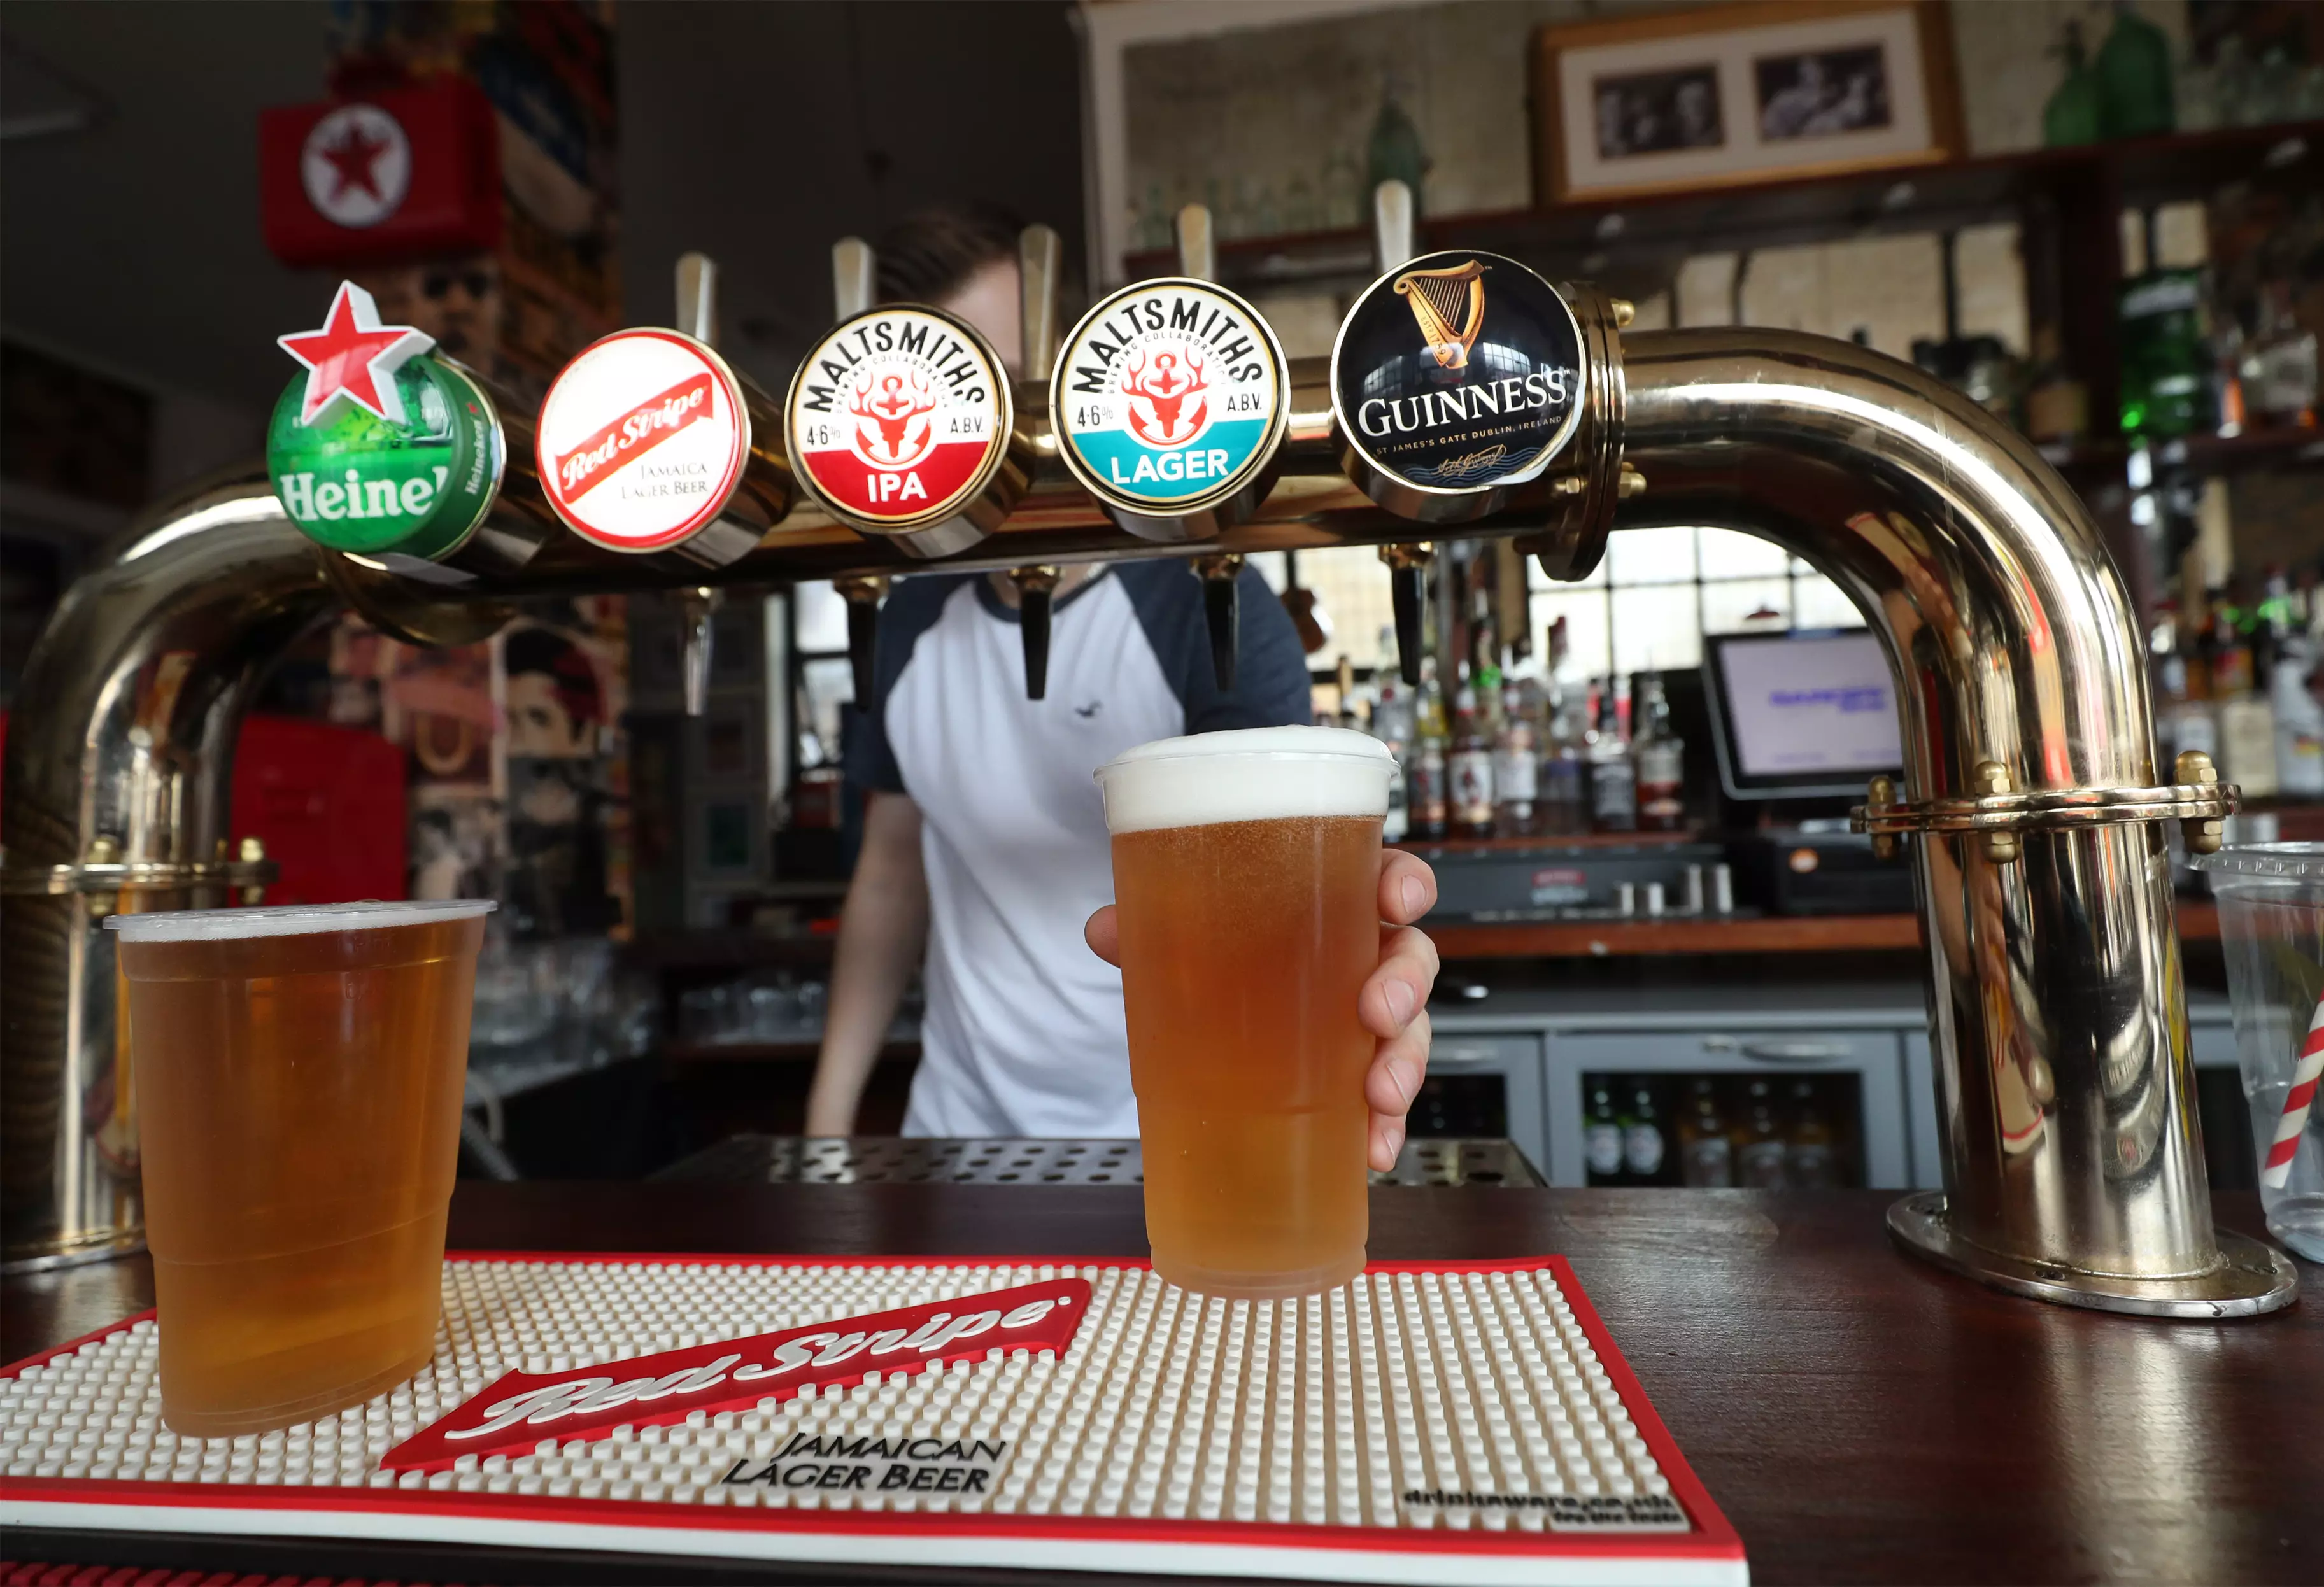 It's feared that 70 million pints may be wasted.